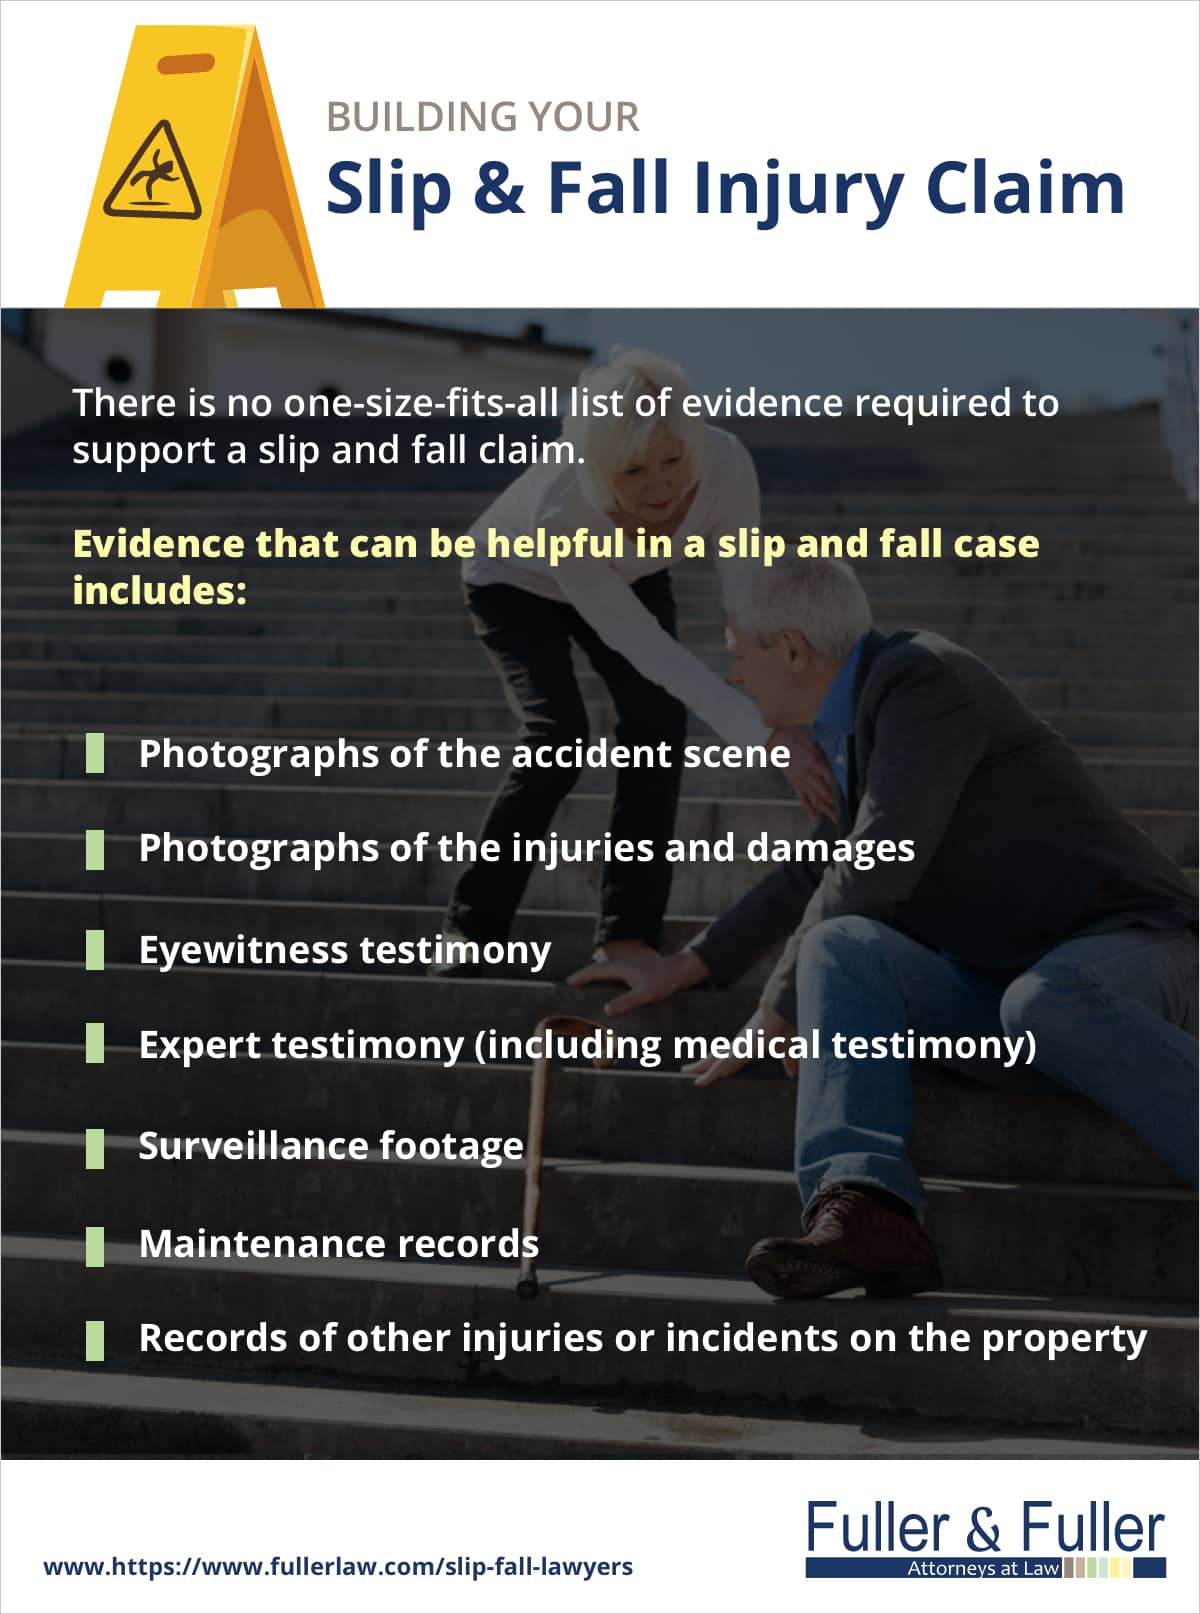 Building Your Slip and Fall Injury Claim